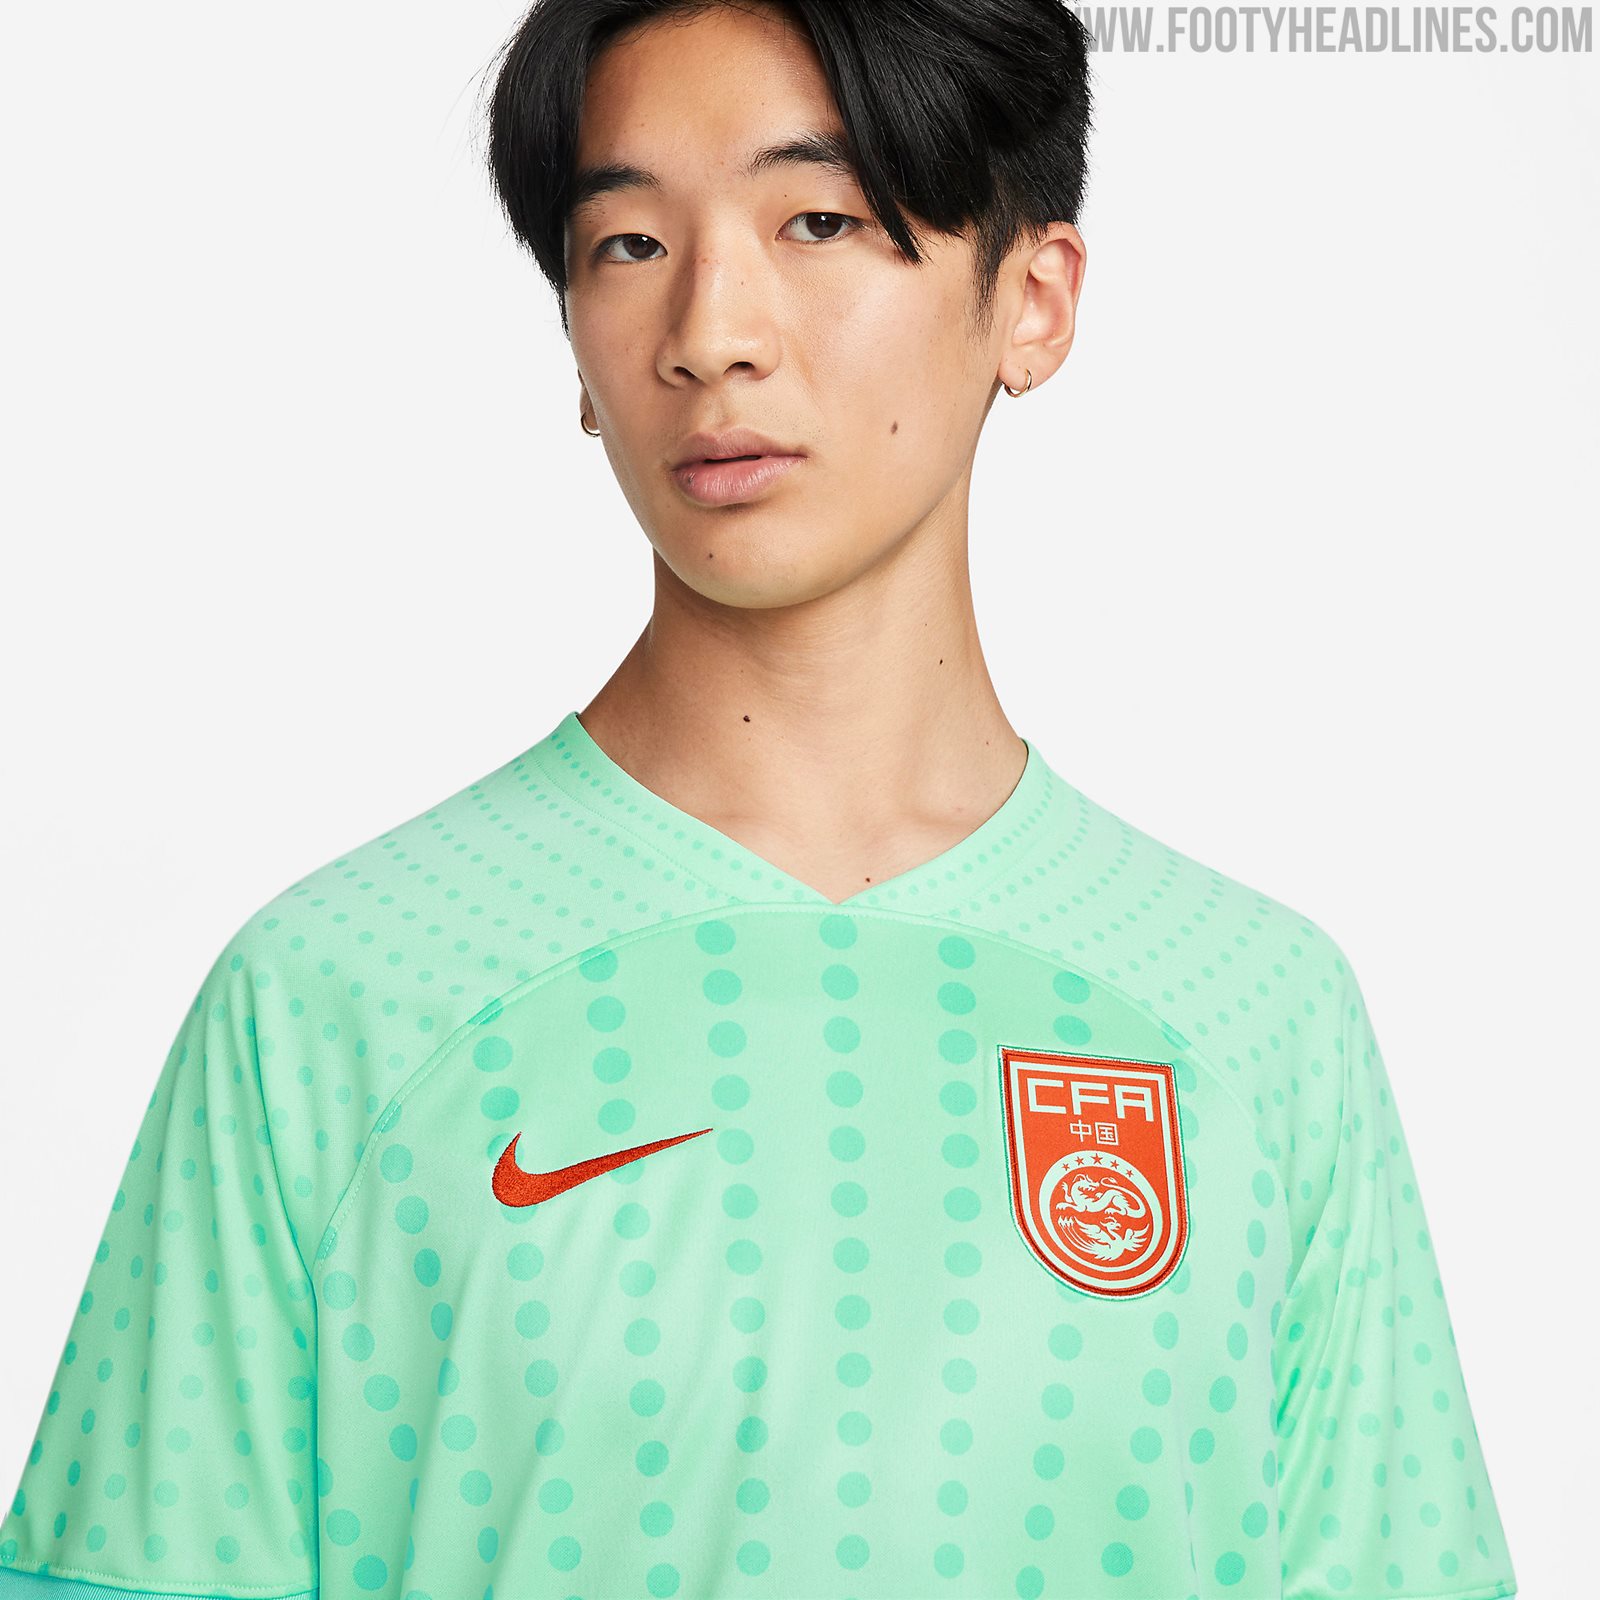 Just a Fake: China Did NOT Reject Another Incredible Dragon-Themed Nike Kit  - Footy Headlines